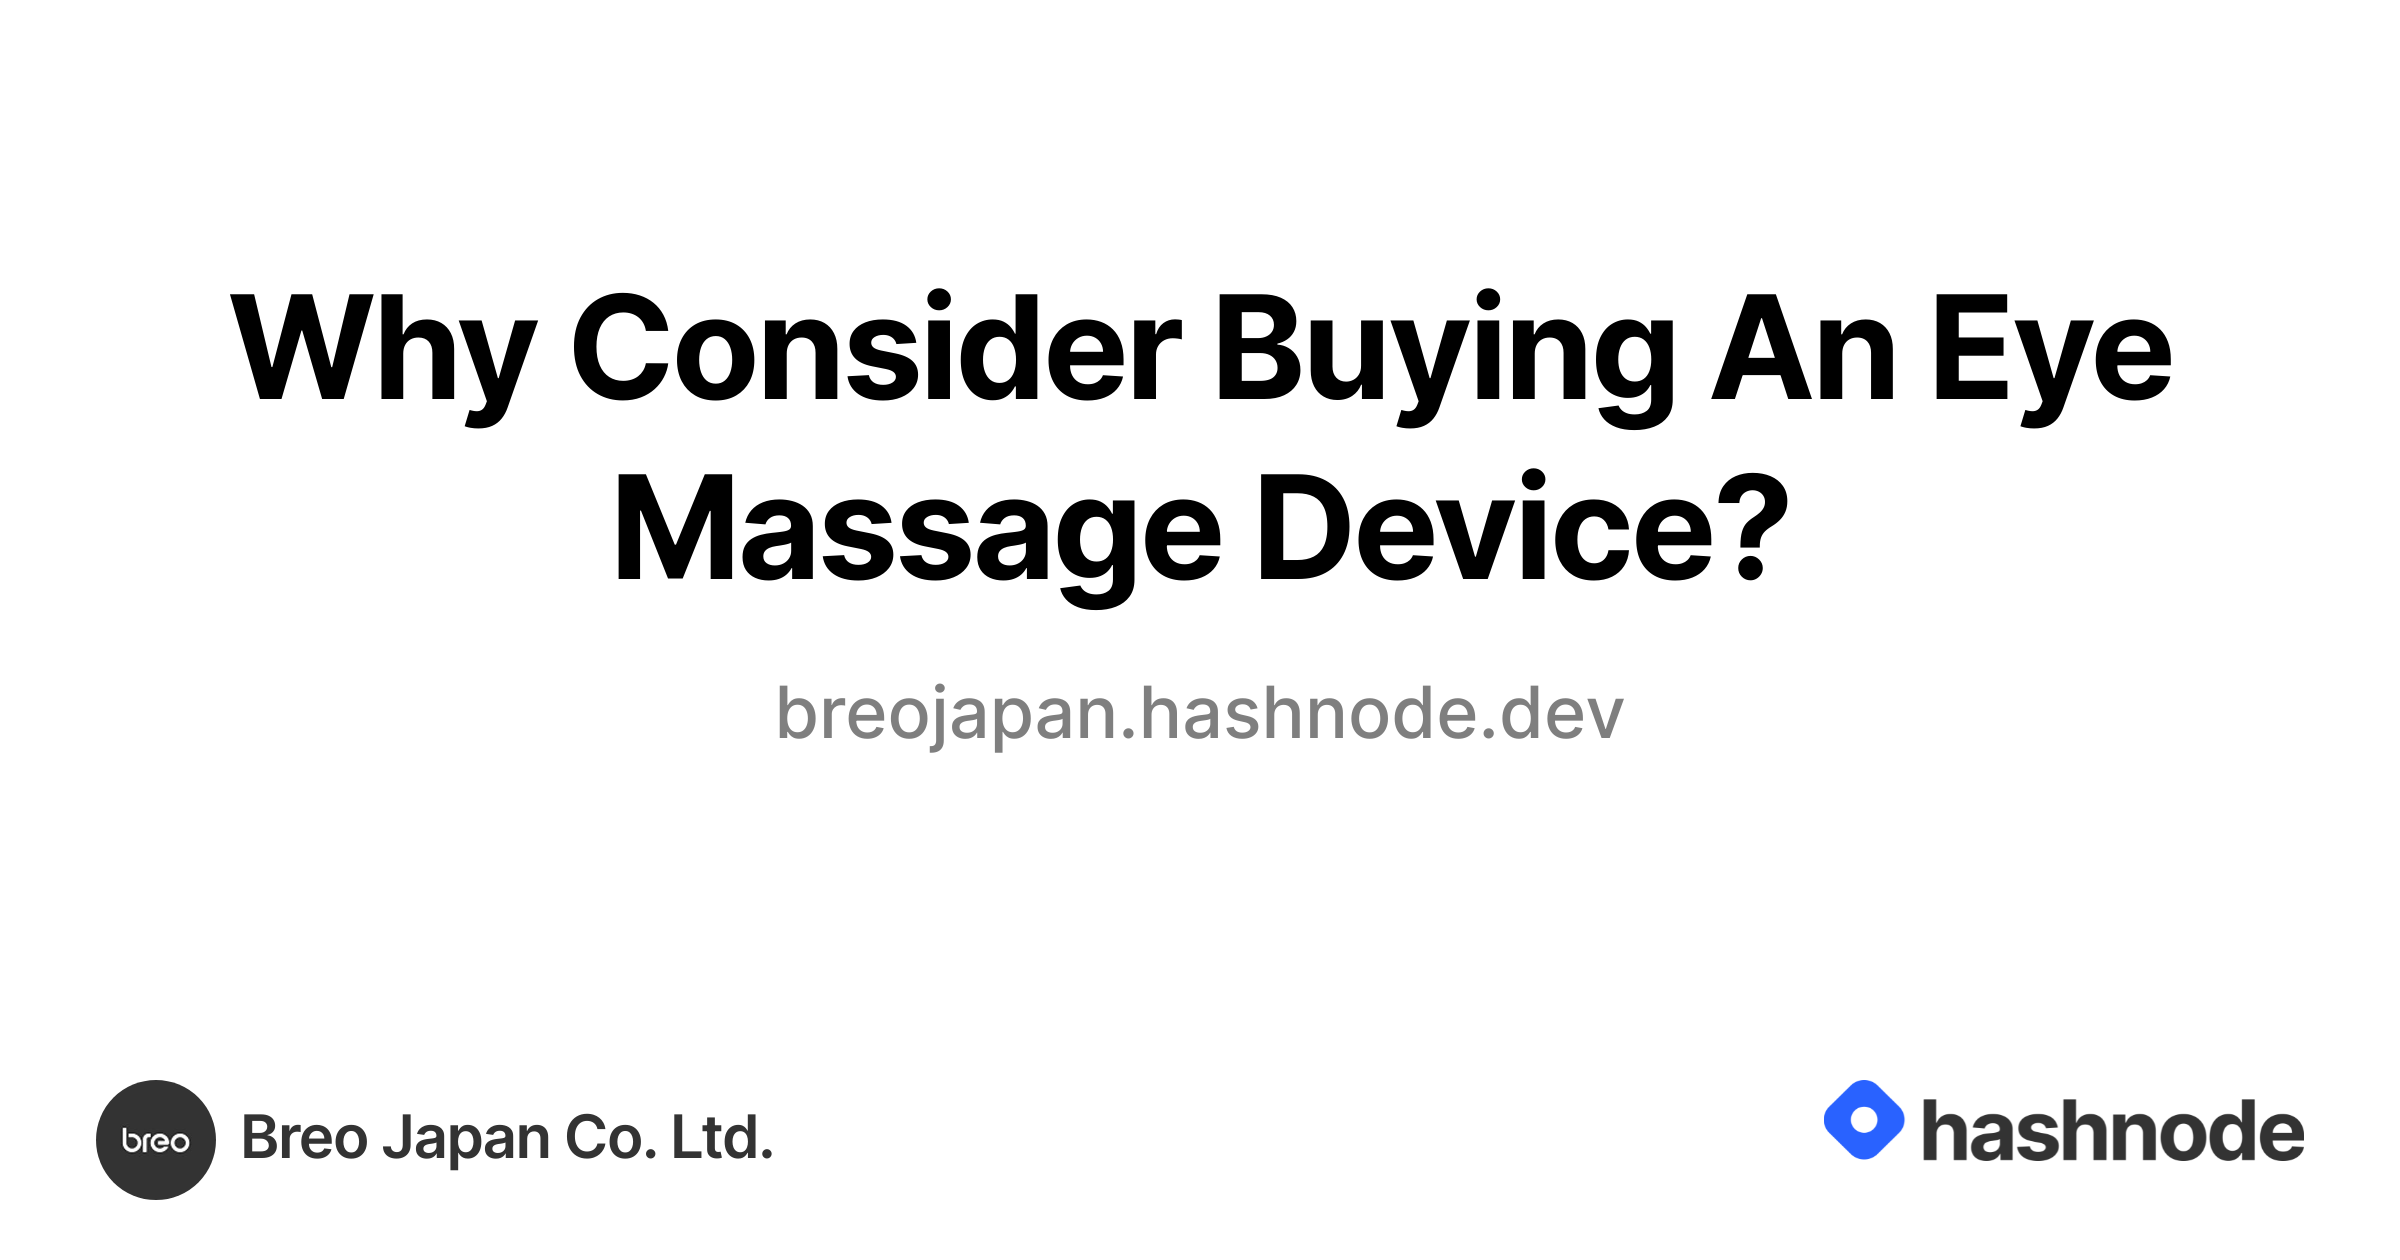 Why Consider Buying An Eye Massage Device?